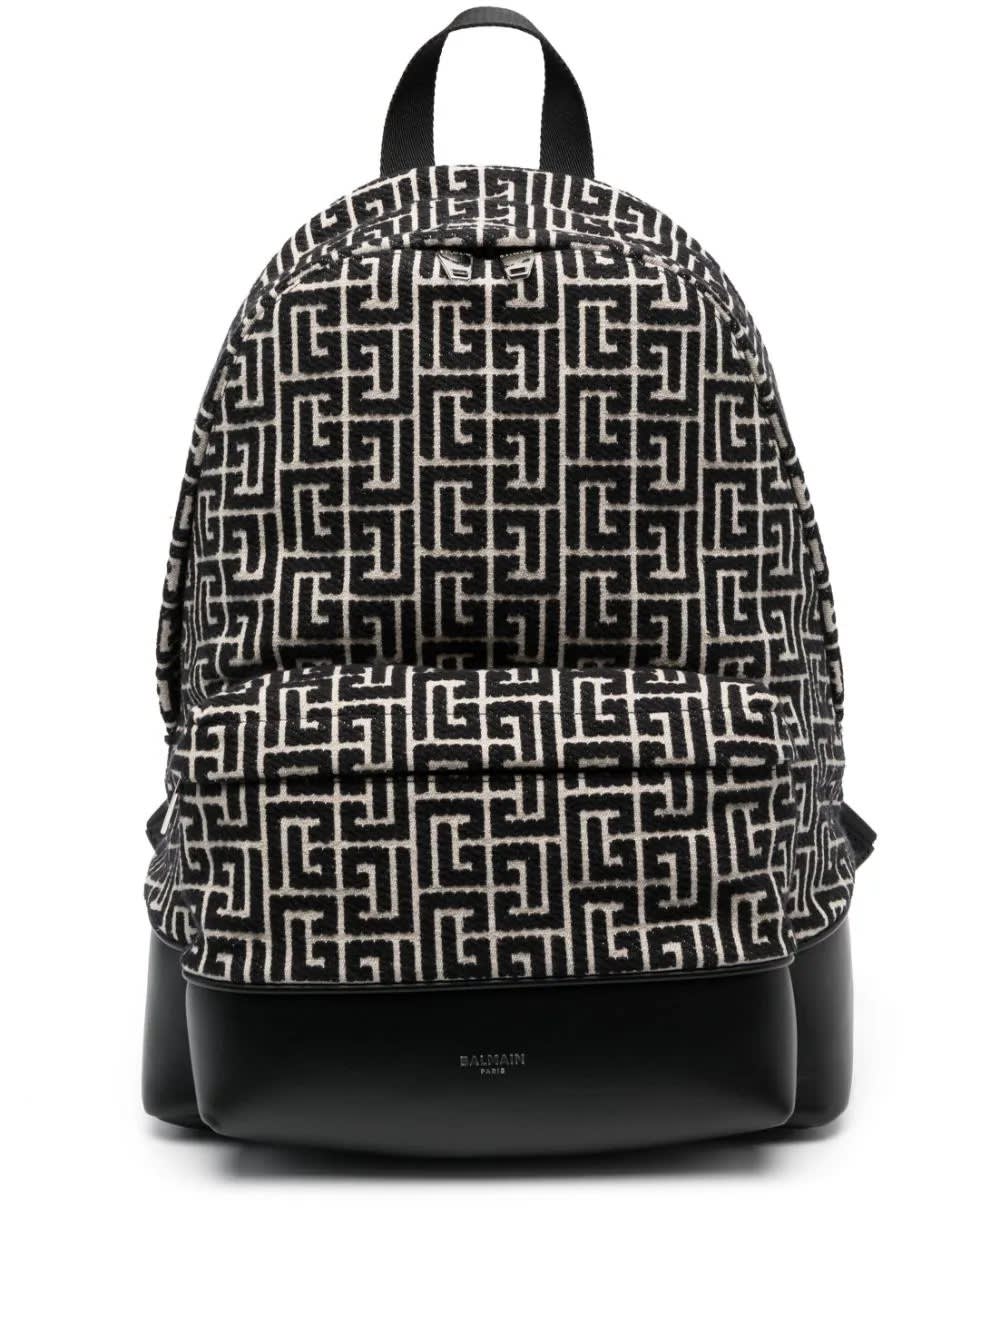 BALMAIN BACKPACK IN BLACK AND IVORY JACQUARD WITH MAXI MONOGRAM